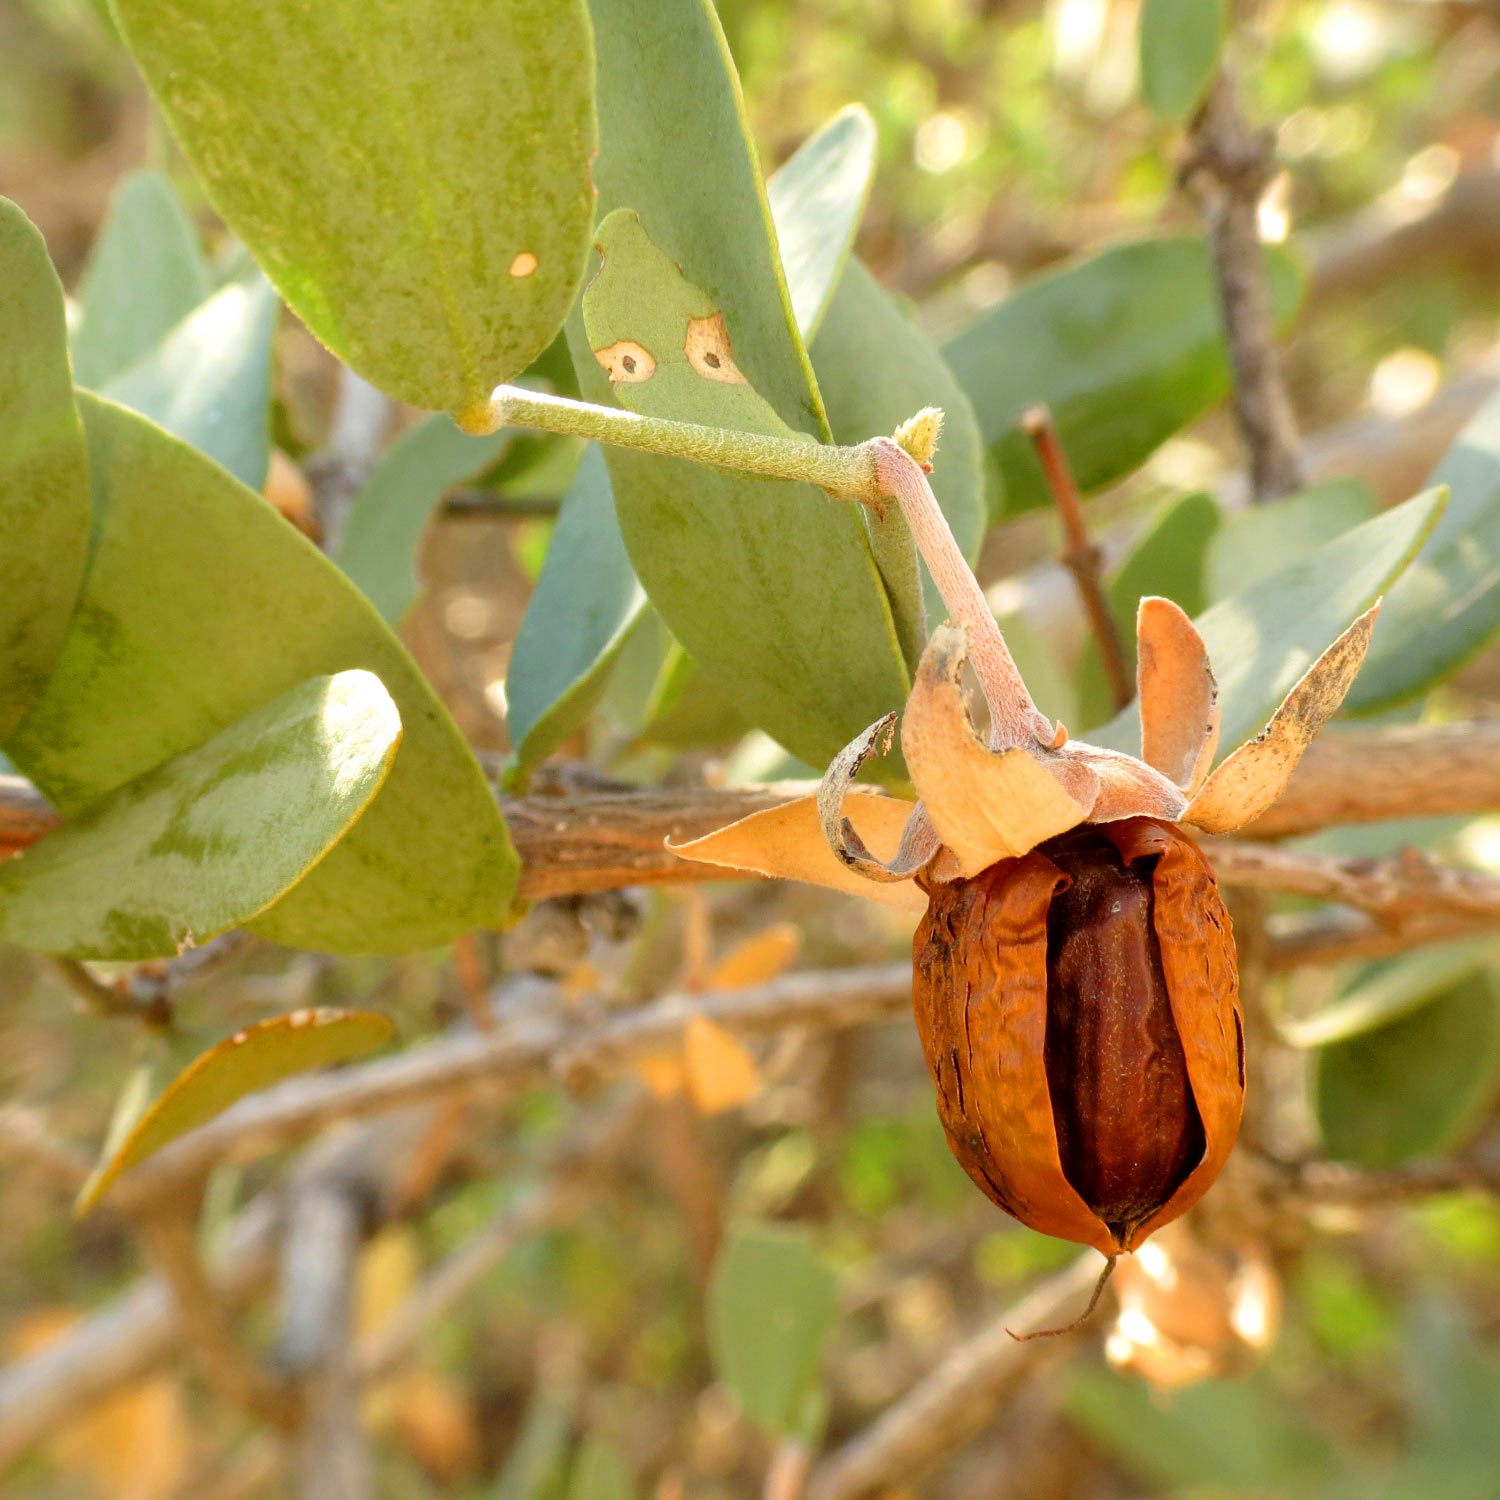 Researchers Sequence Genome of Jojoba Plant